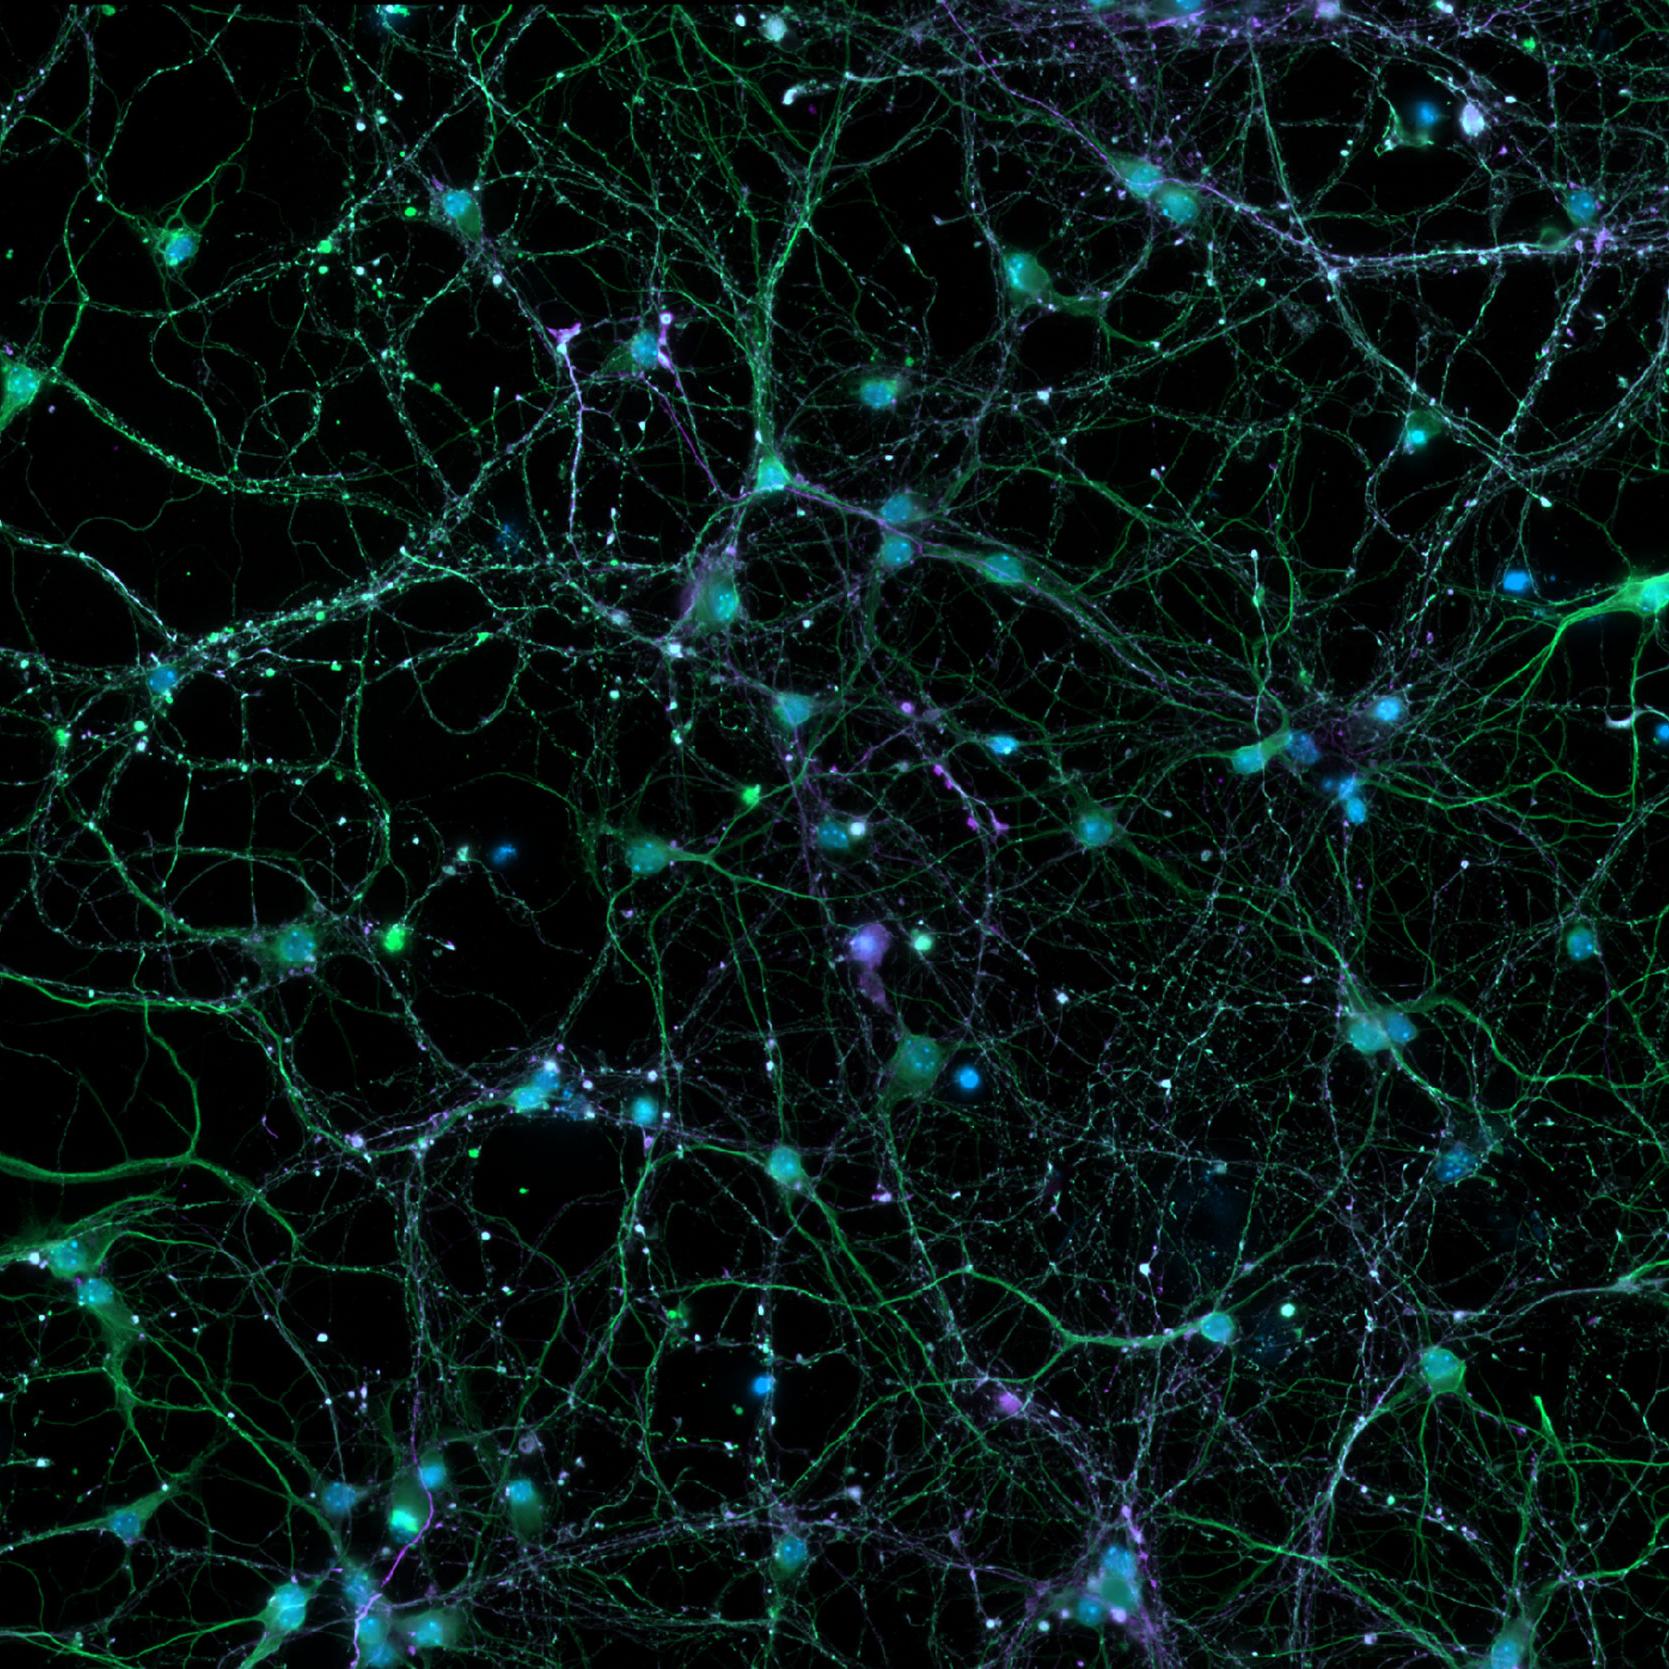 Cortical neurons stained for DNA, microtubules and microtubule-associated proteins. Courtesy: Leibniz-Institute on Aging – Fritz-Lipmann-Institut e.V. (FLI), Germany.